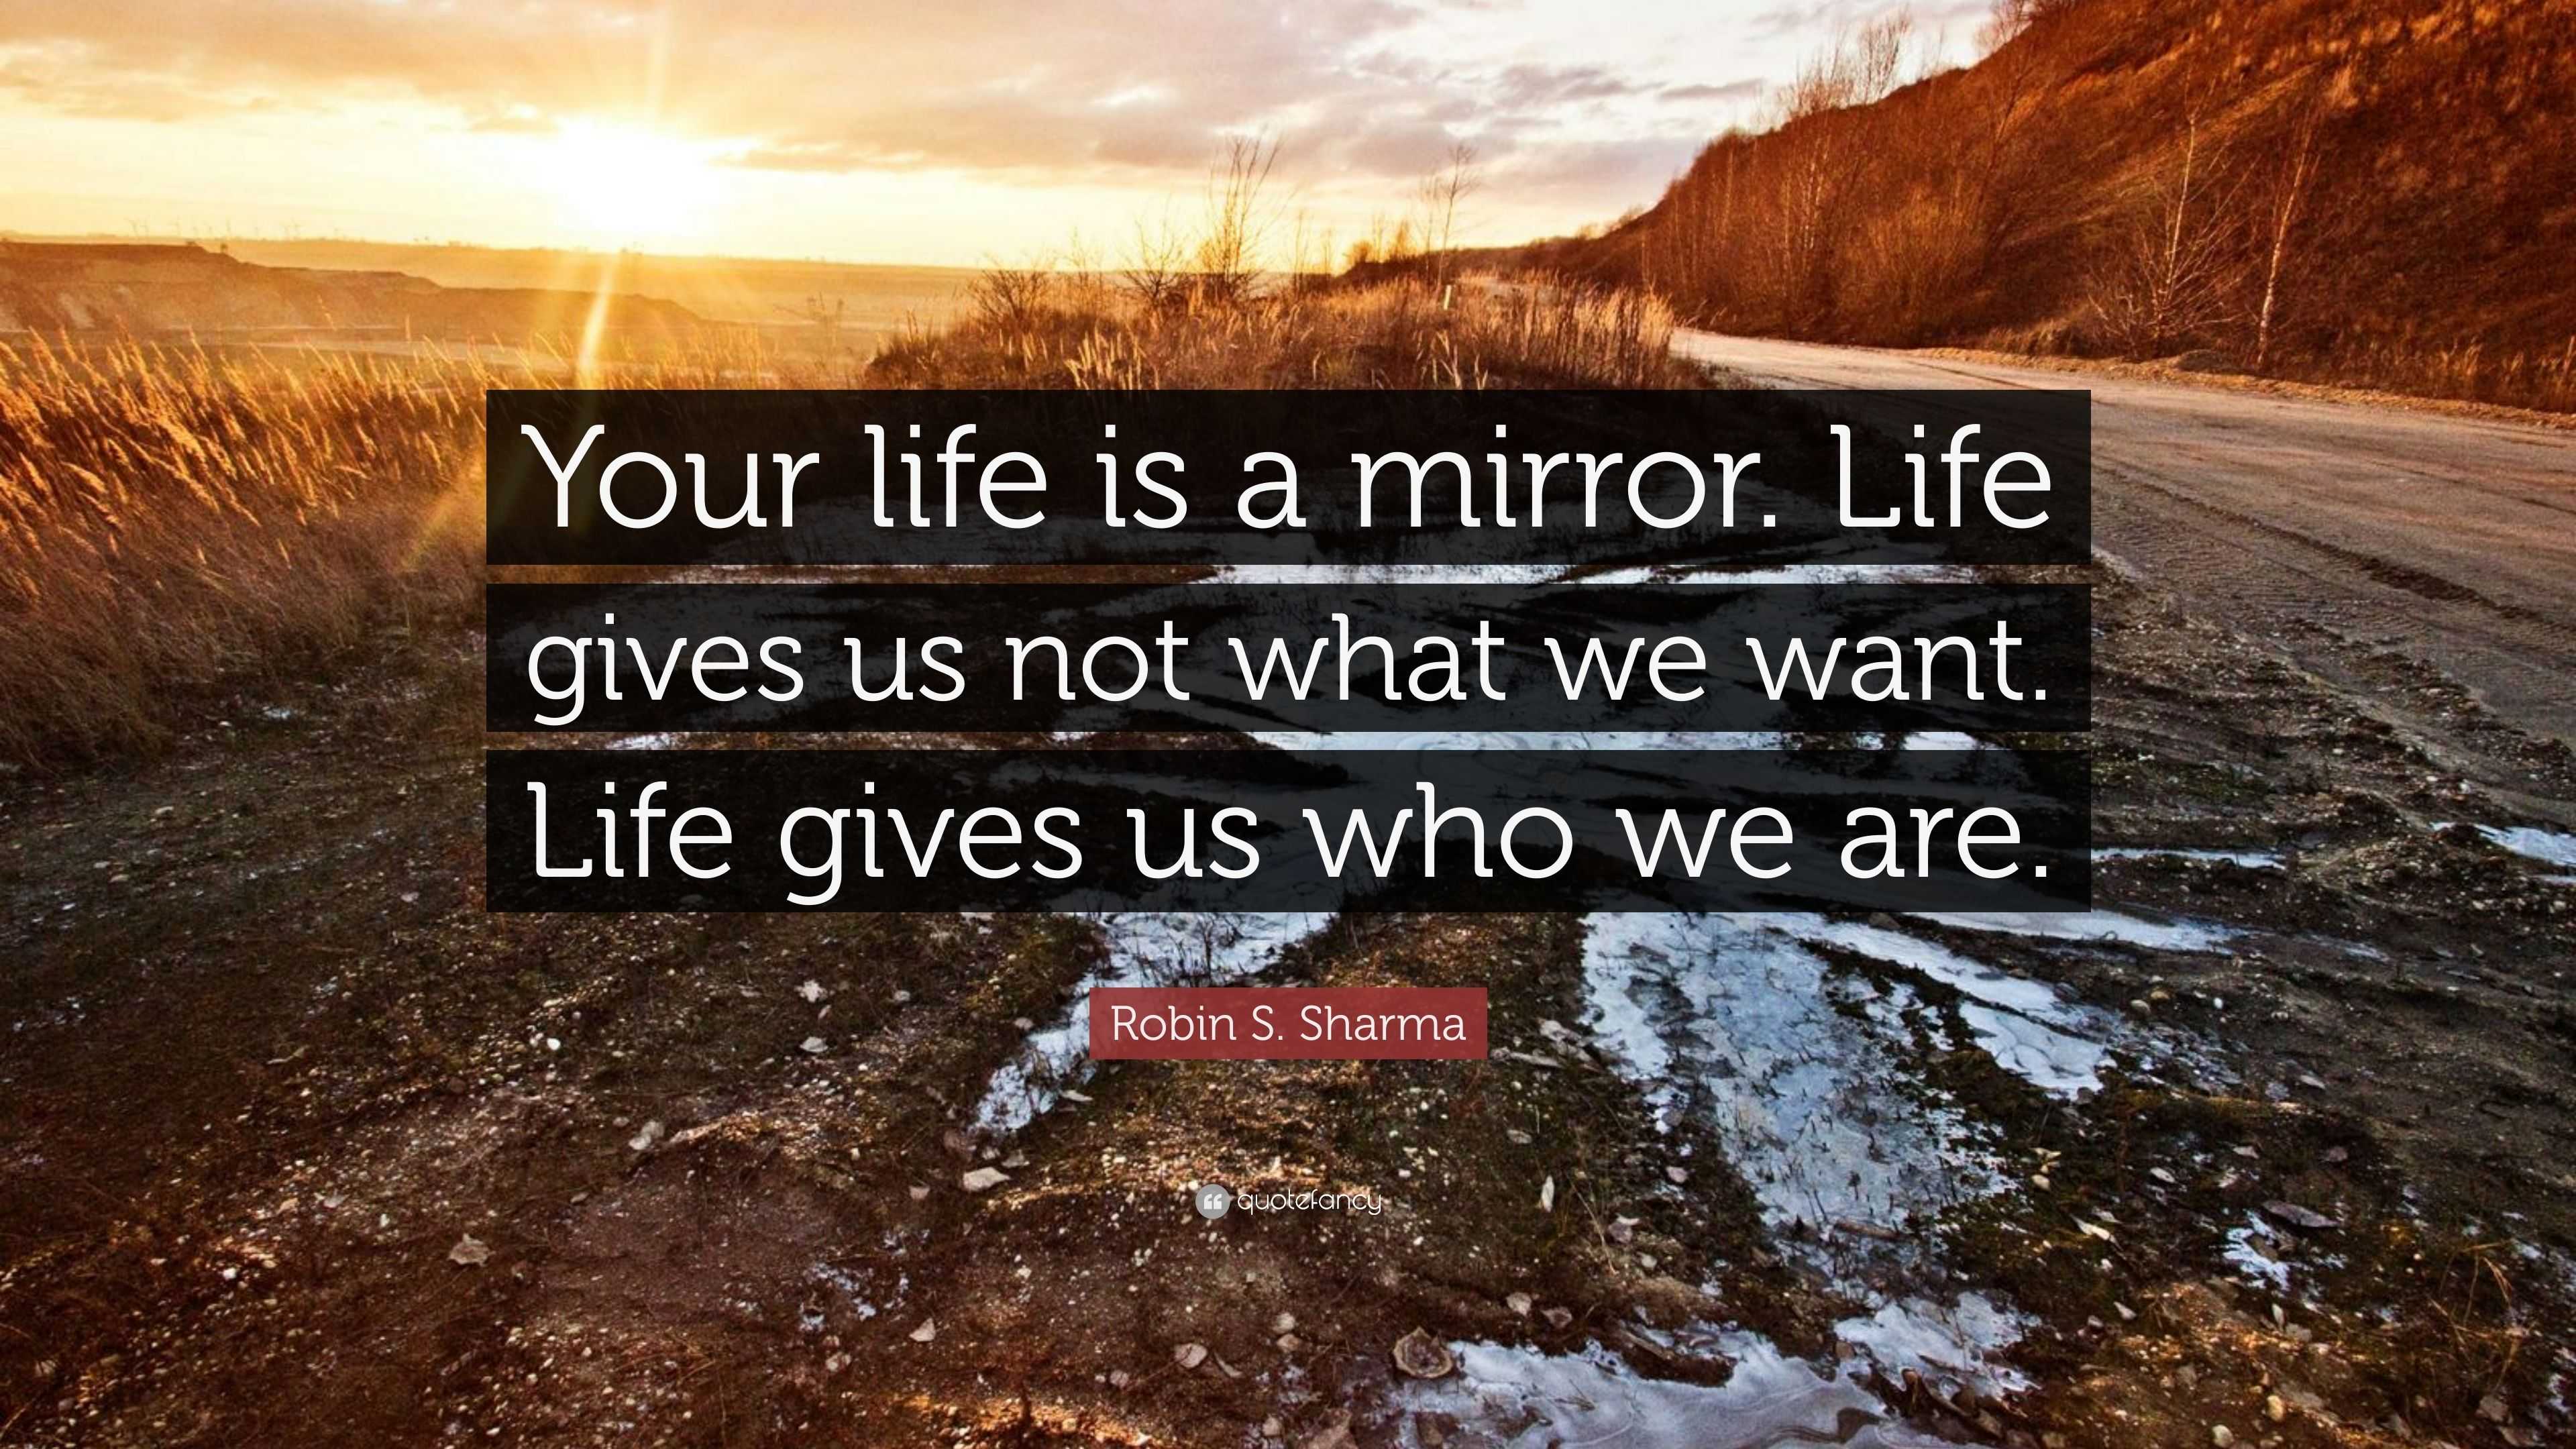 Robin S Sharma Quote “Your life is a mirror Life gives us